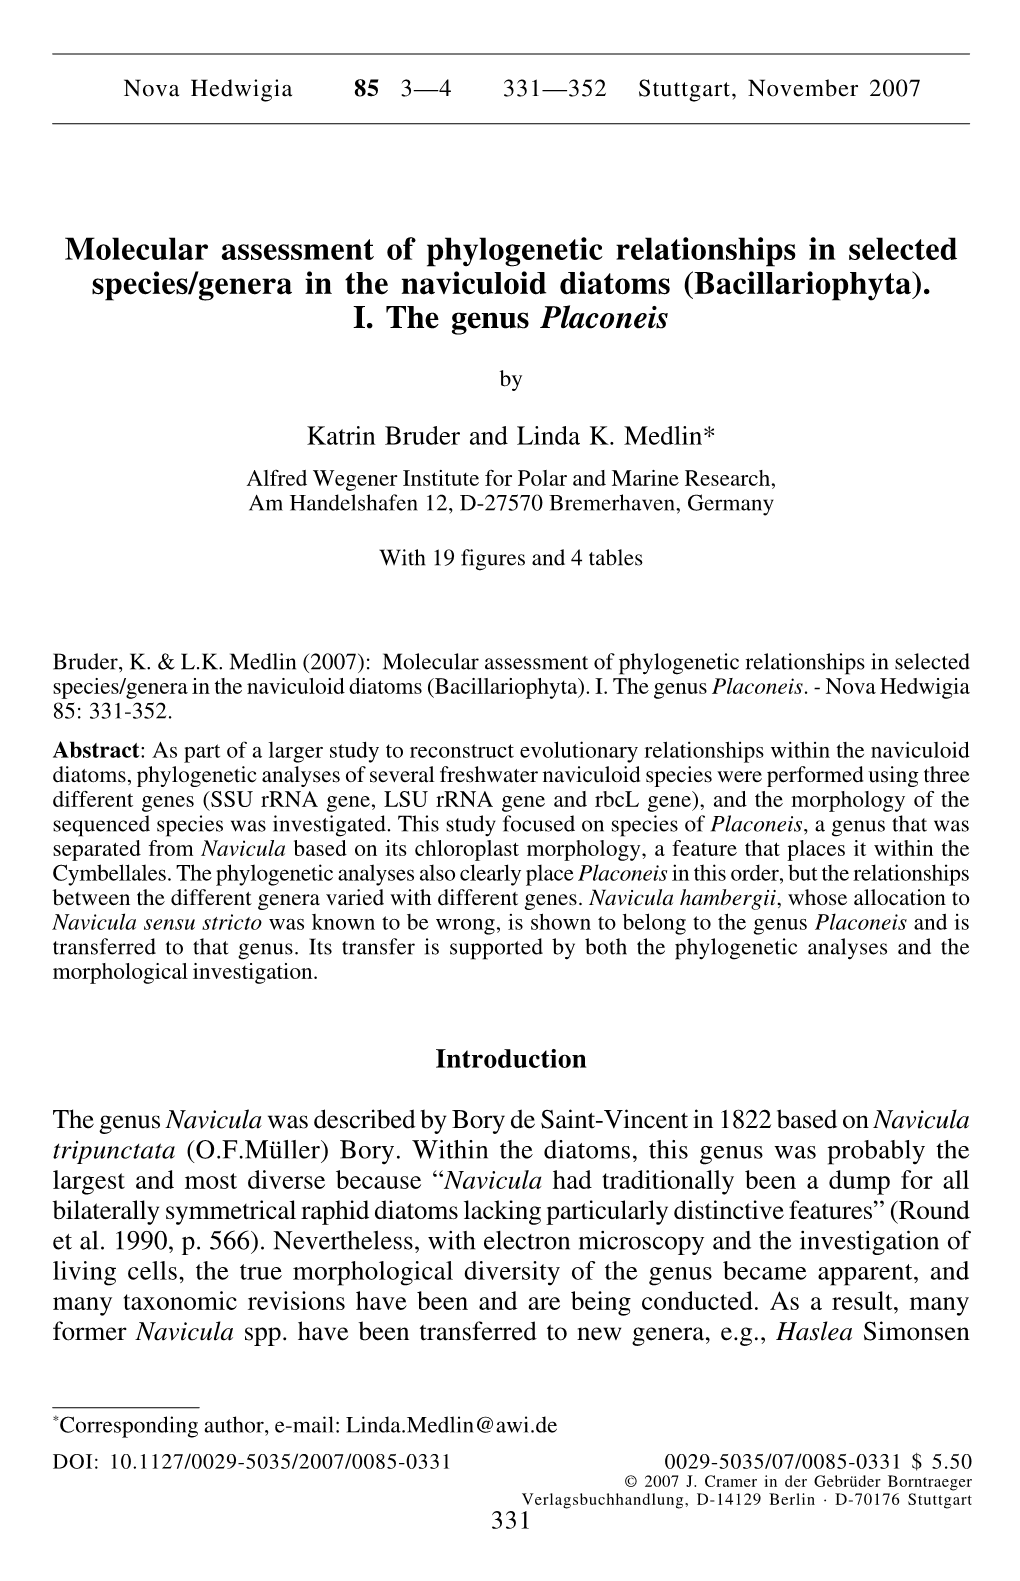 Molecular Assessment of Phylogenetic Relationships in Selected Species/Genera in the Naviculoid Diatoms (Bacillariophyta)